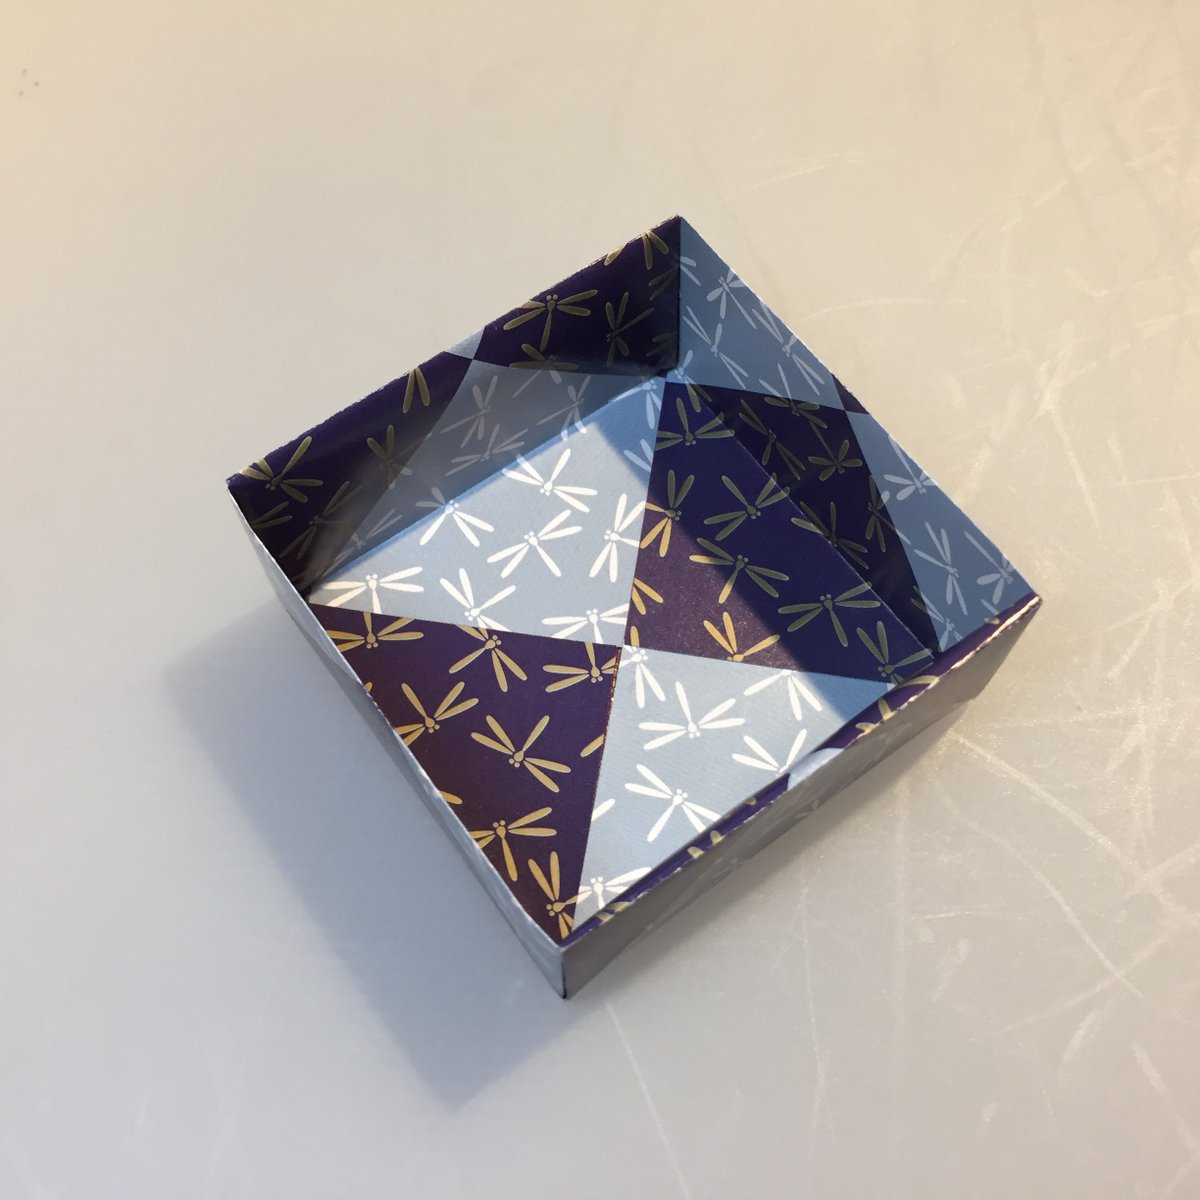 9. This traditional masu box is an intermediate model but usually one of the first models that beginners learn. It’s important to make pre-creases as accurately as possible so that the box will hold together when you assemble it.  #origami